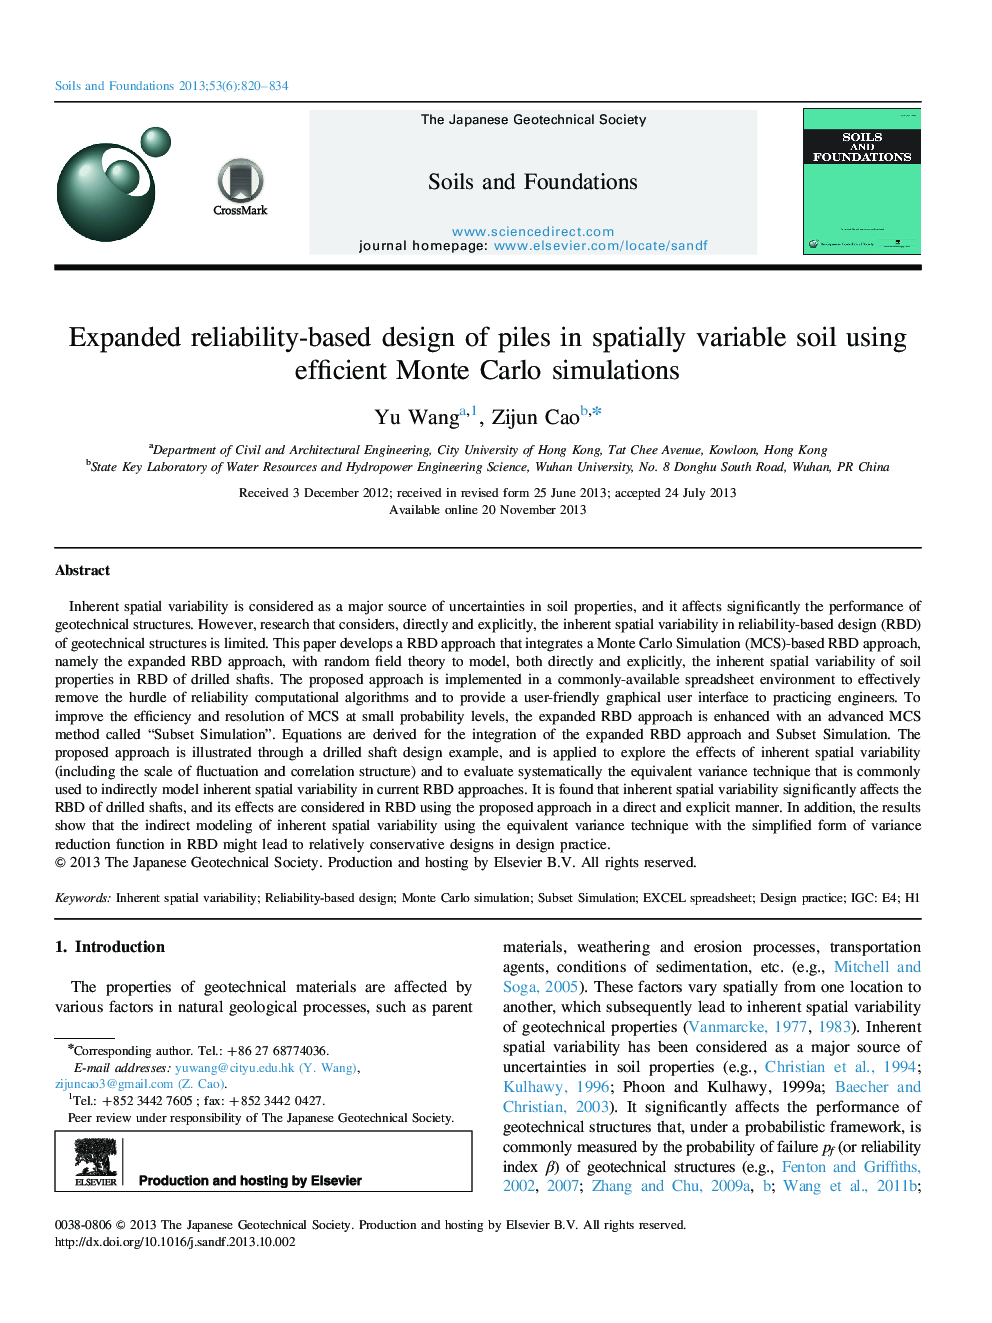 Expanded reliability-based design of piles in spatially variable soil using efficient Monte Carlo simulations 